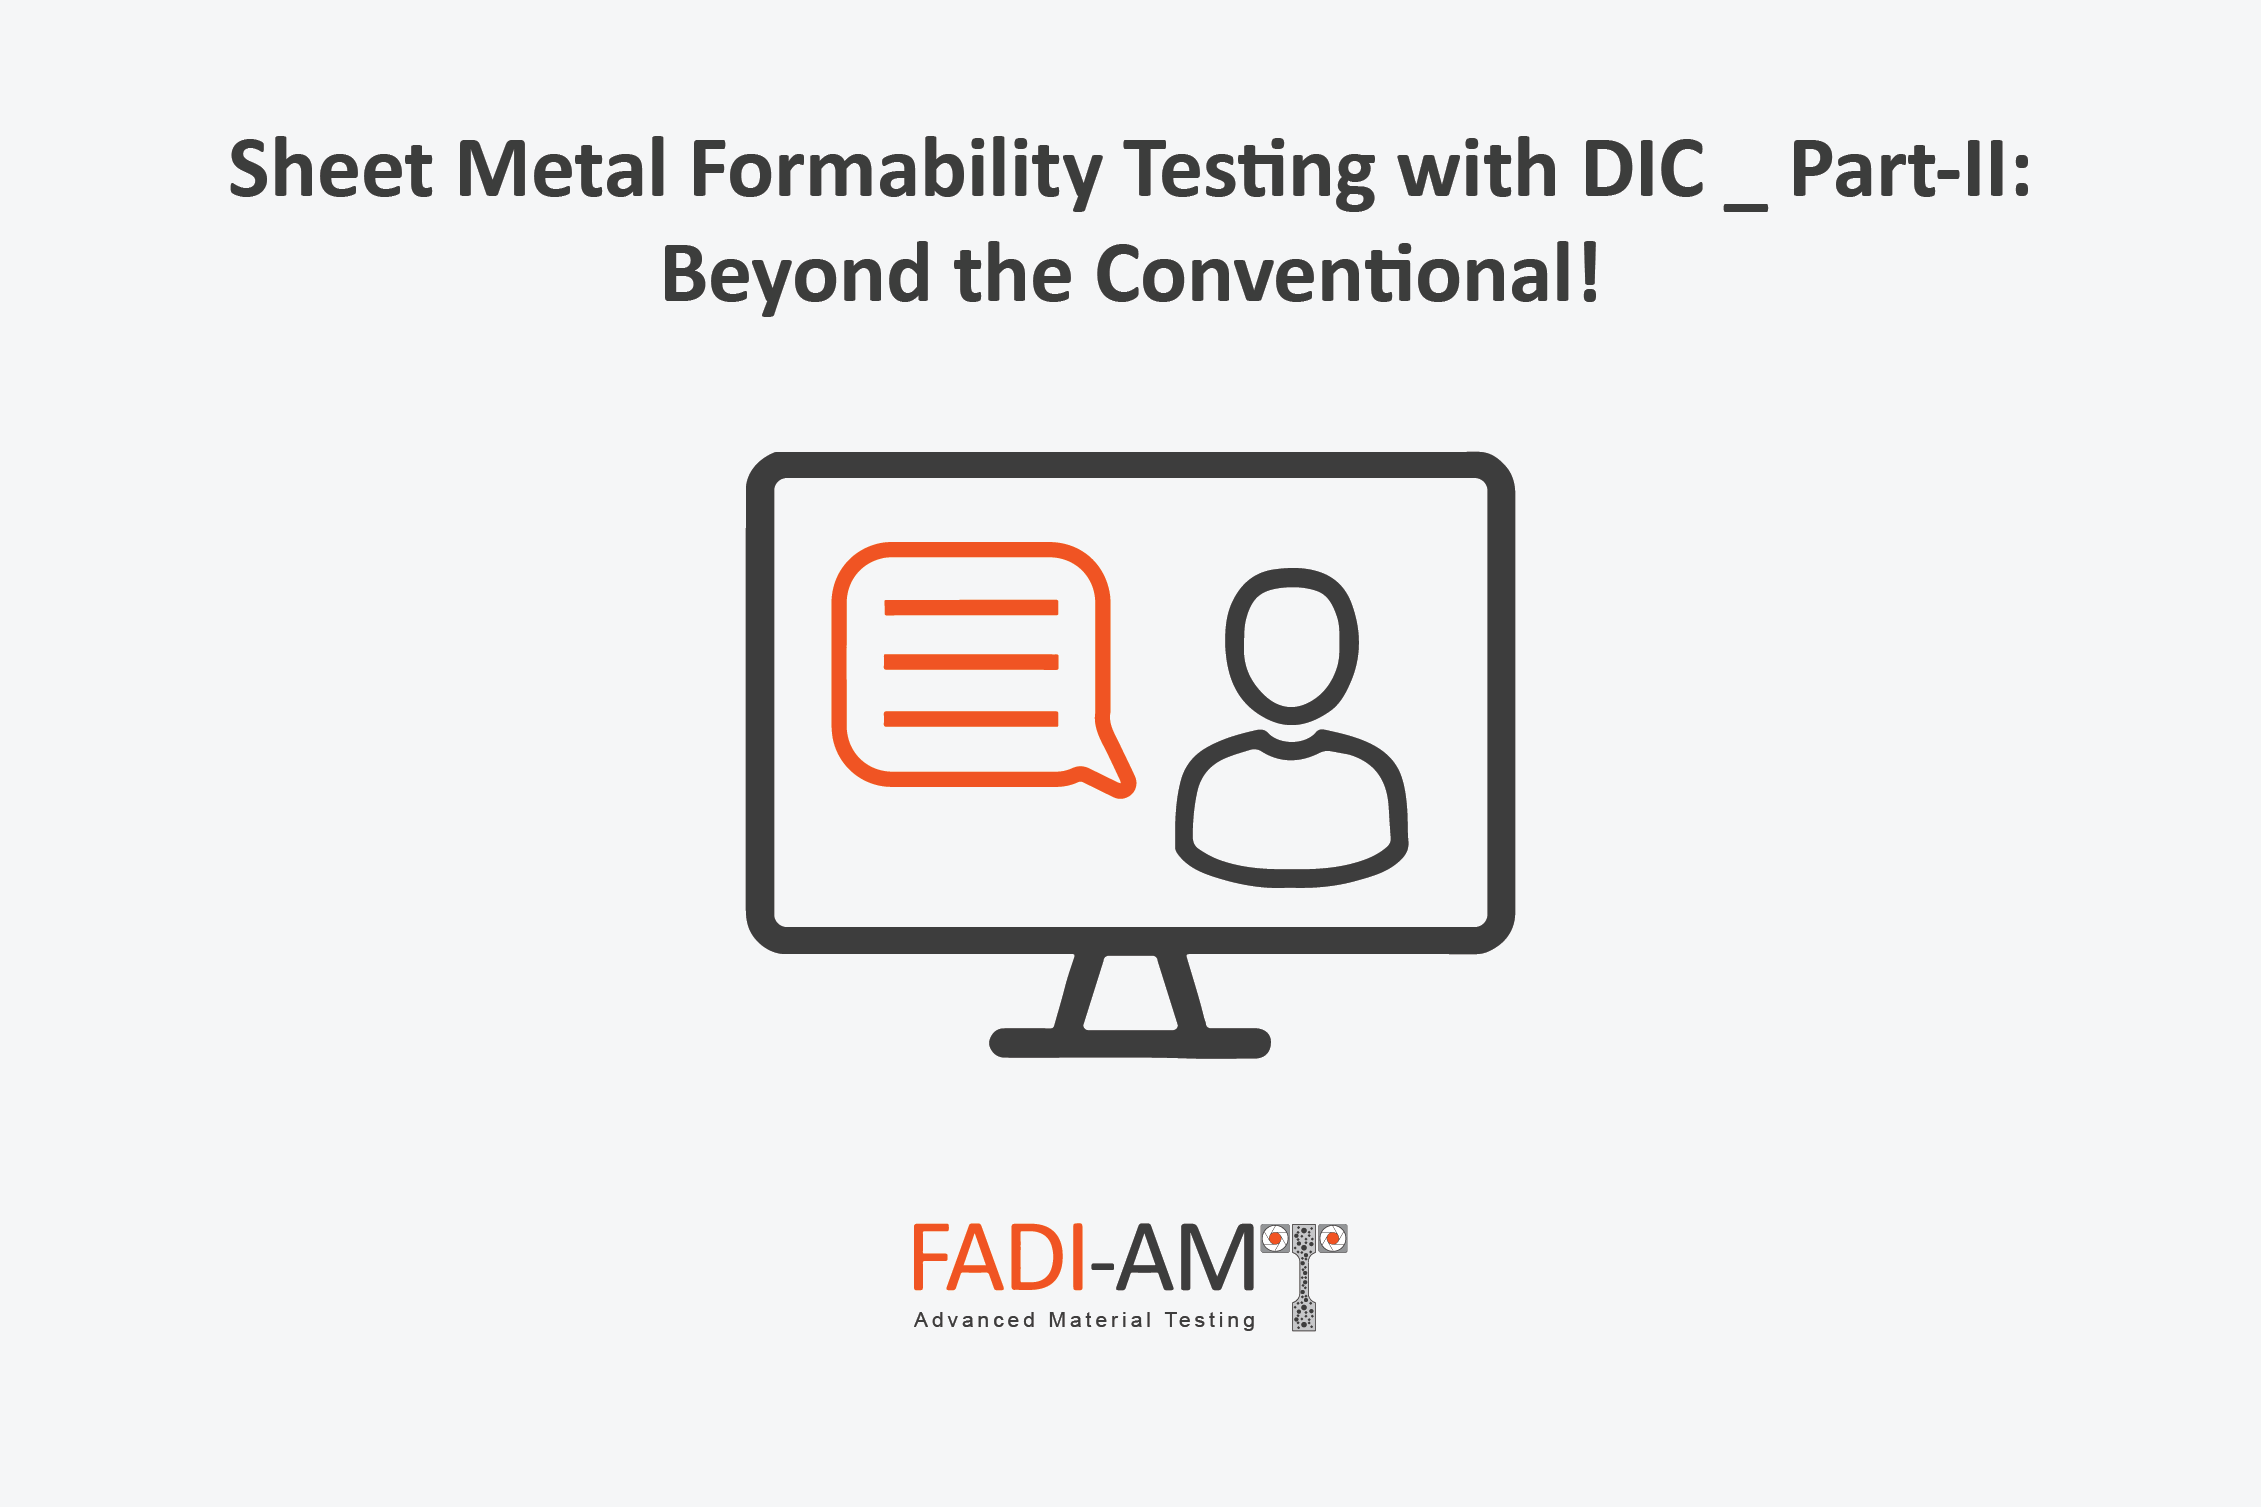 Sheet Metal Formability Testing with DIC _ Part-II_Beyond the Conventional FADI-AMT